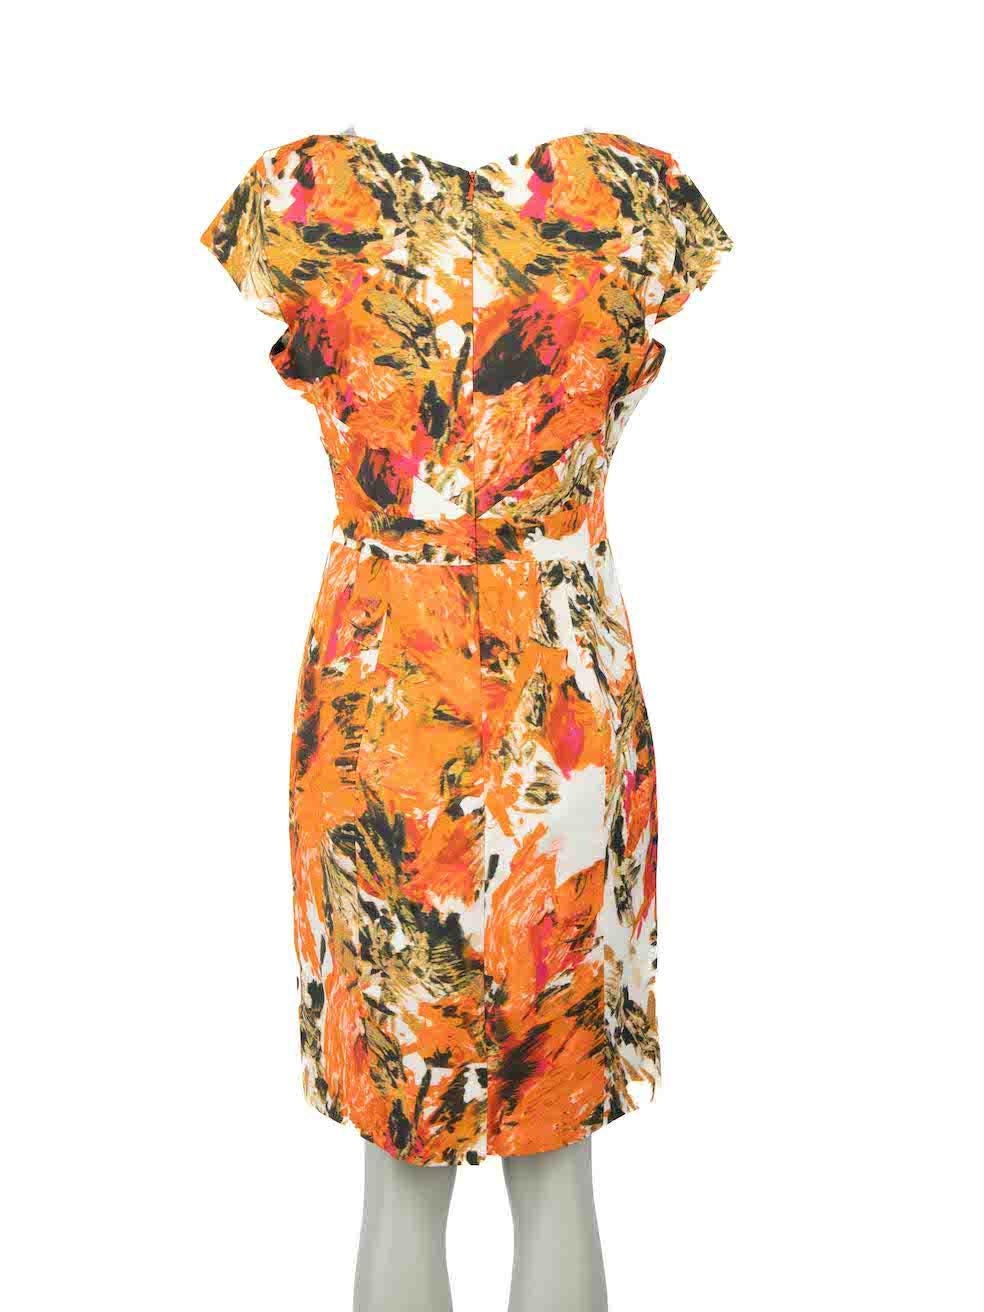 Erdem Orange Abstract Pattern Mini Dress Size L In Excellent Condition For Sale In London, GB